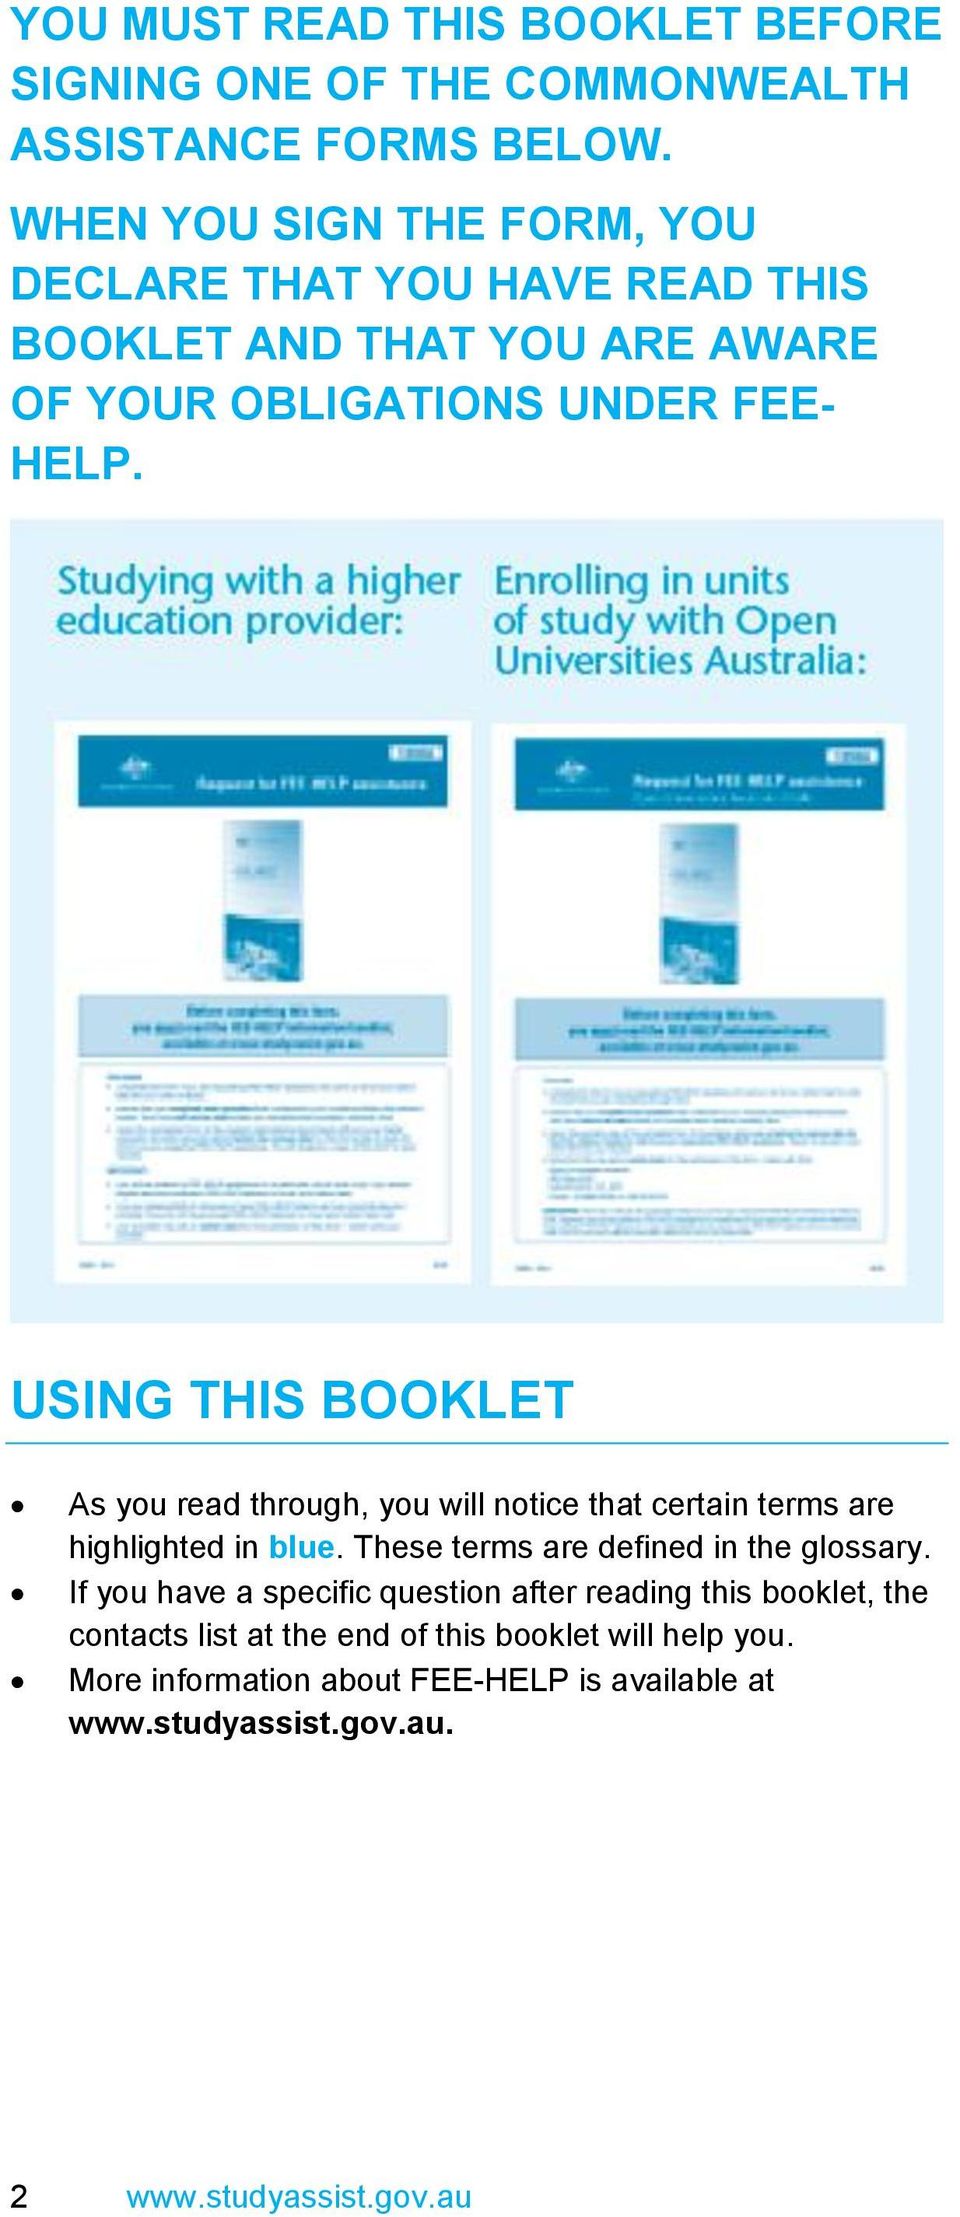 USING THIS BOOKLET As you read through, you will notice that certain terms are highlighted in blue. These terms are defined in the glossary.